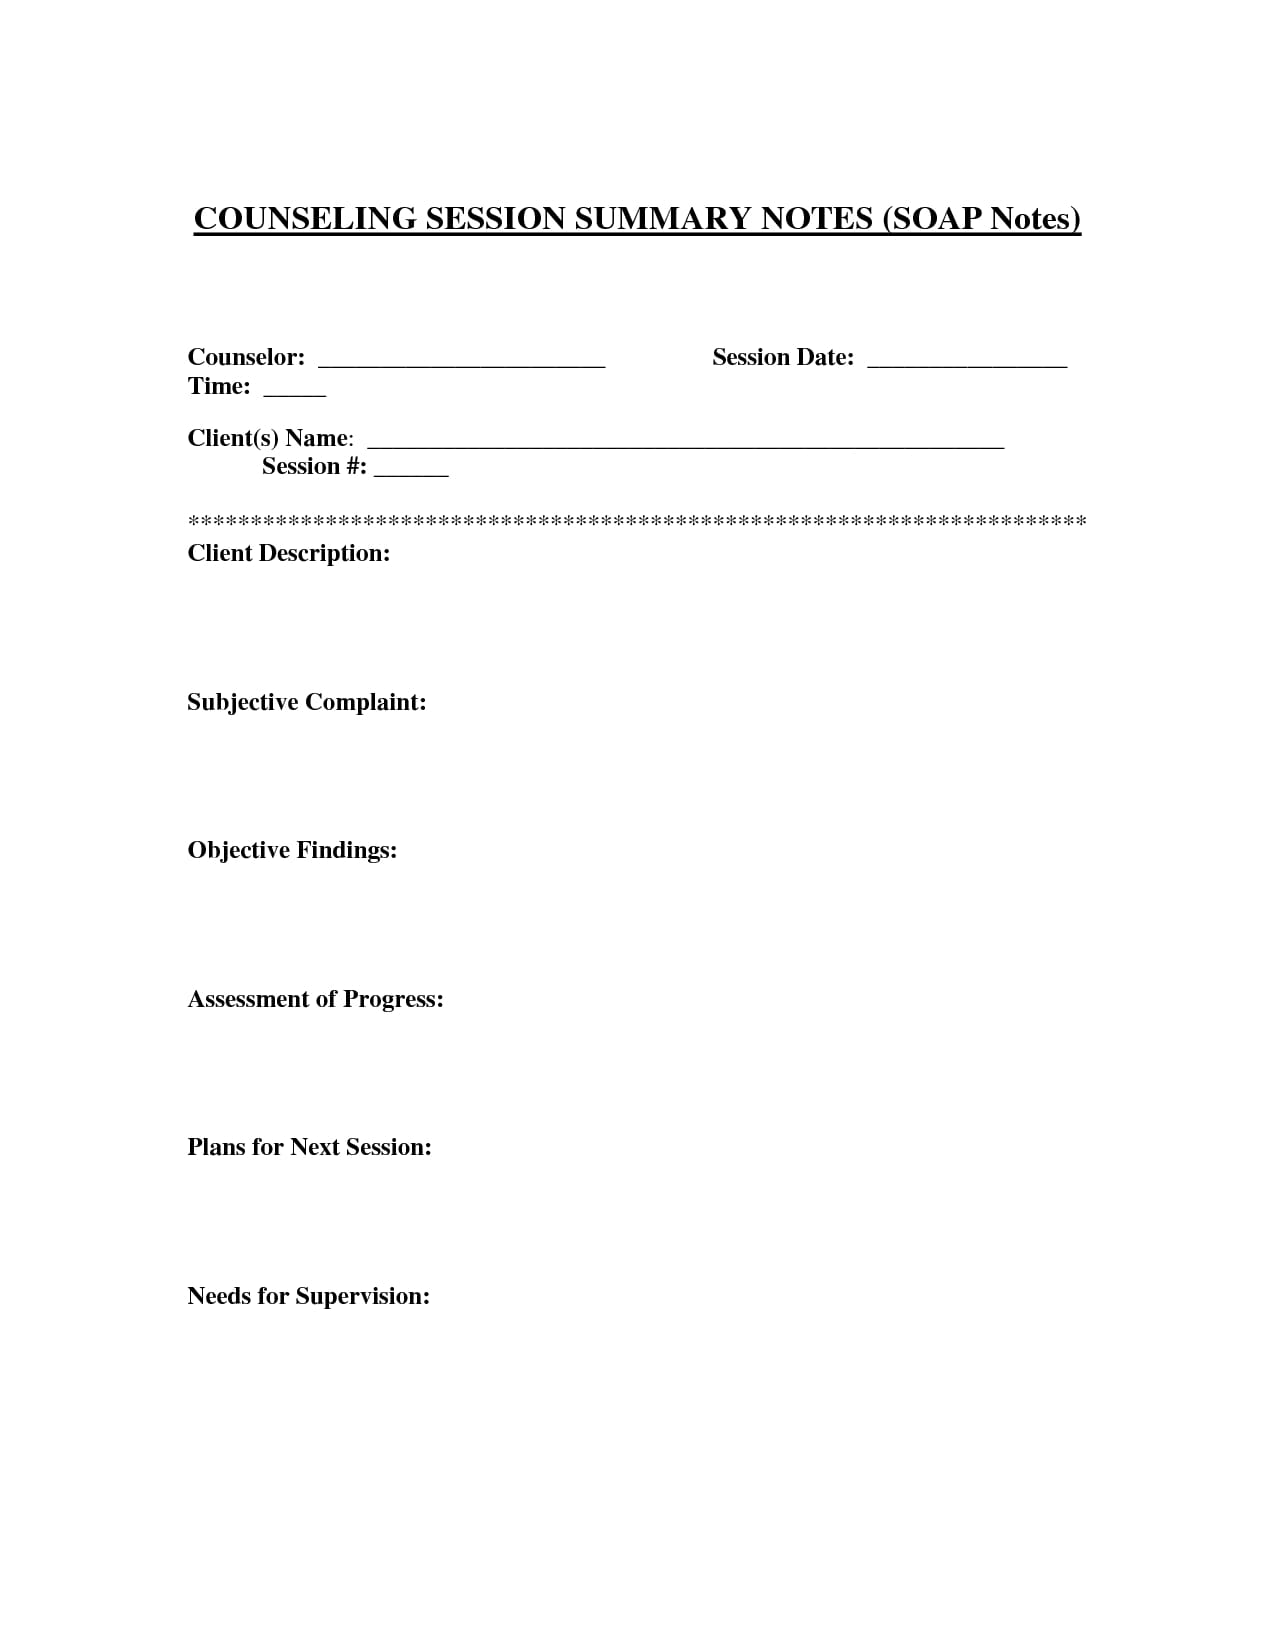 Printable Counseling SOAP Note Templates_18223